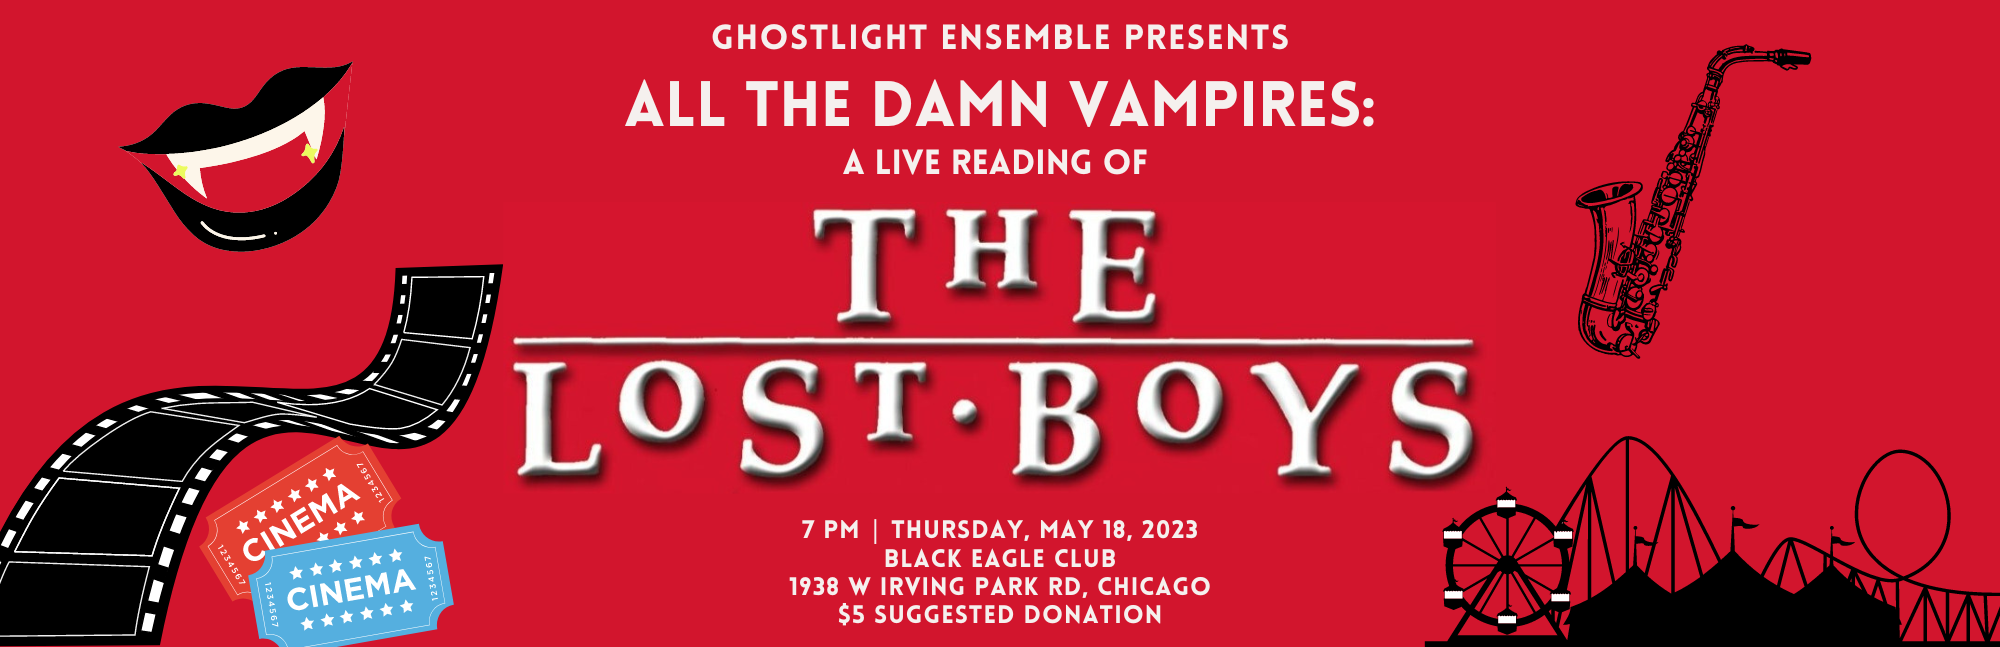 All The Damn Vampires: A Live Reading of The Lost Boys